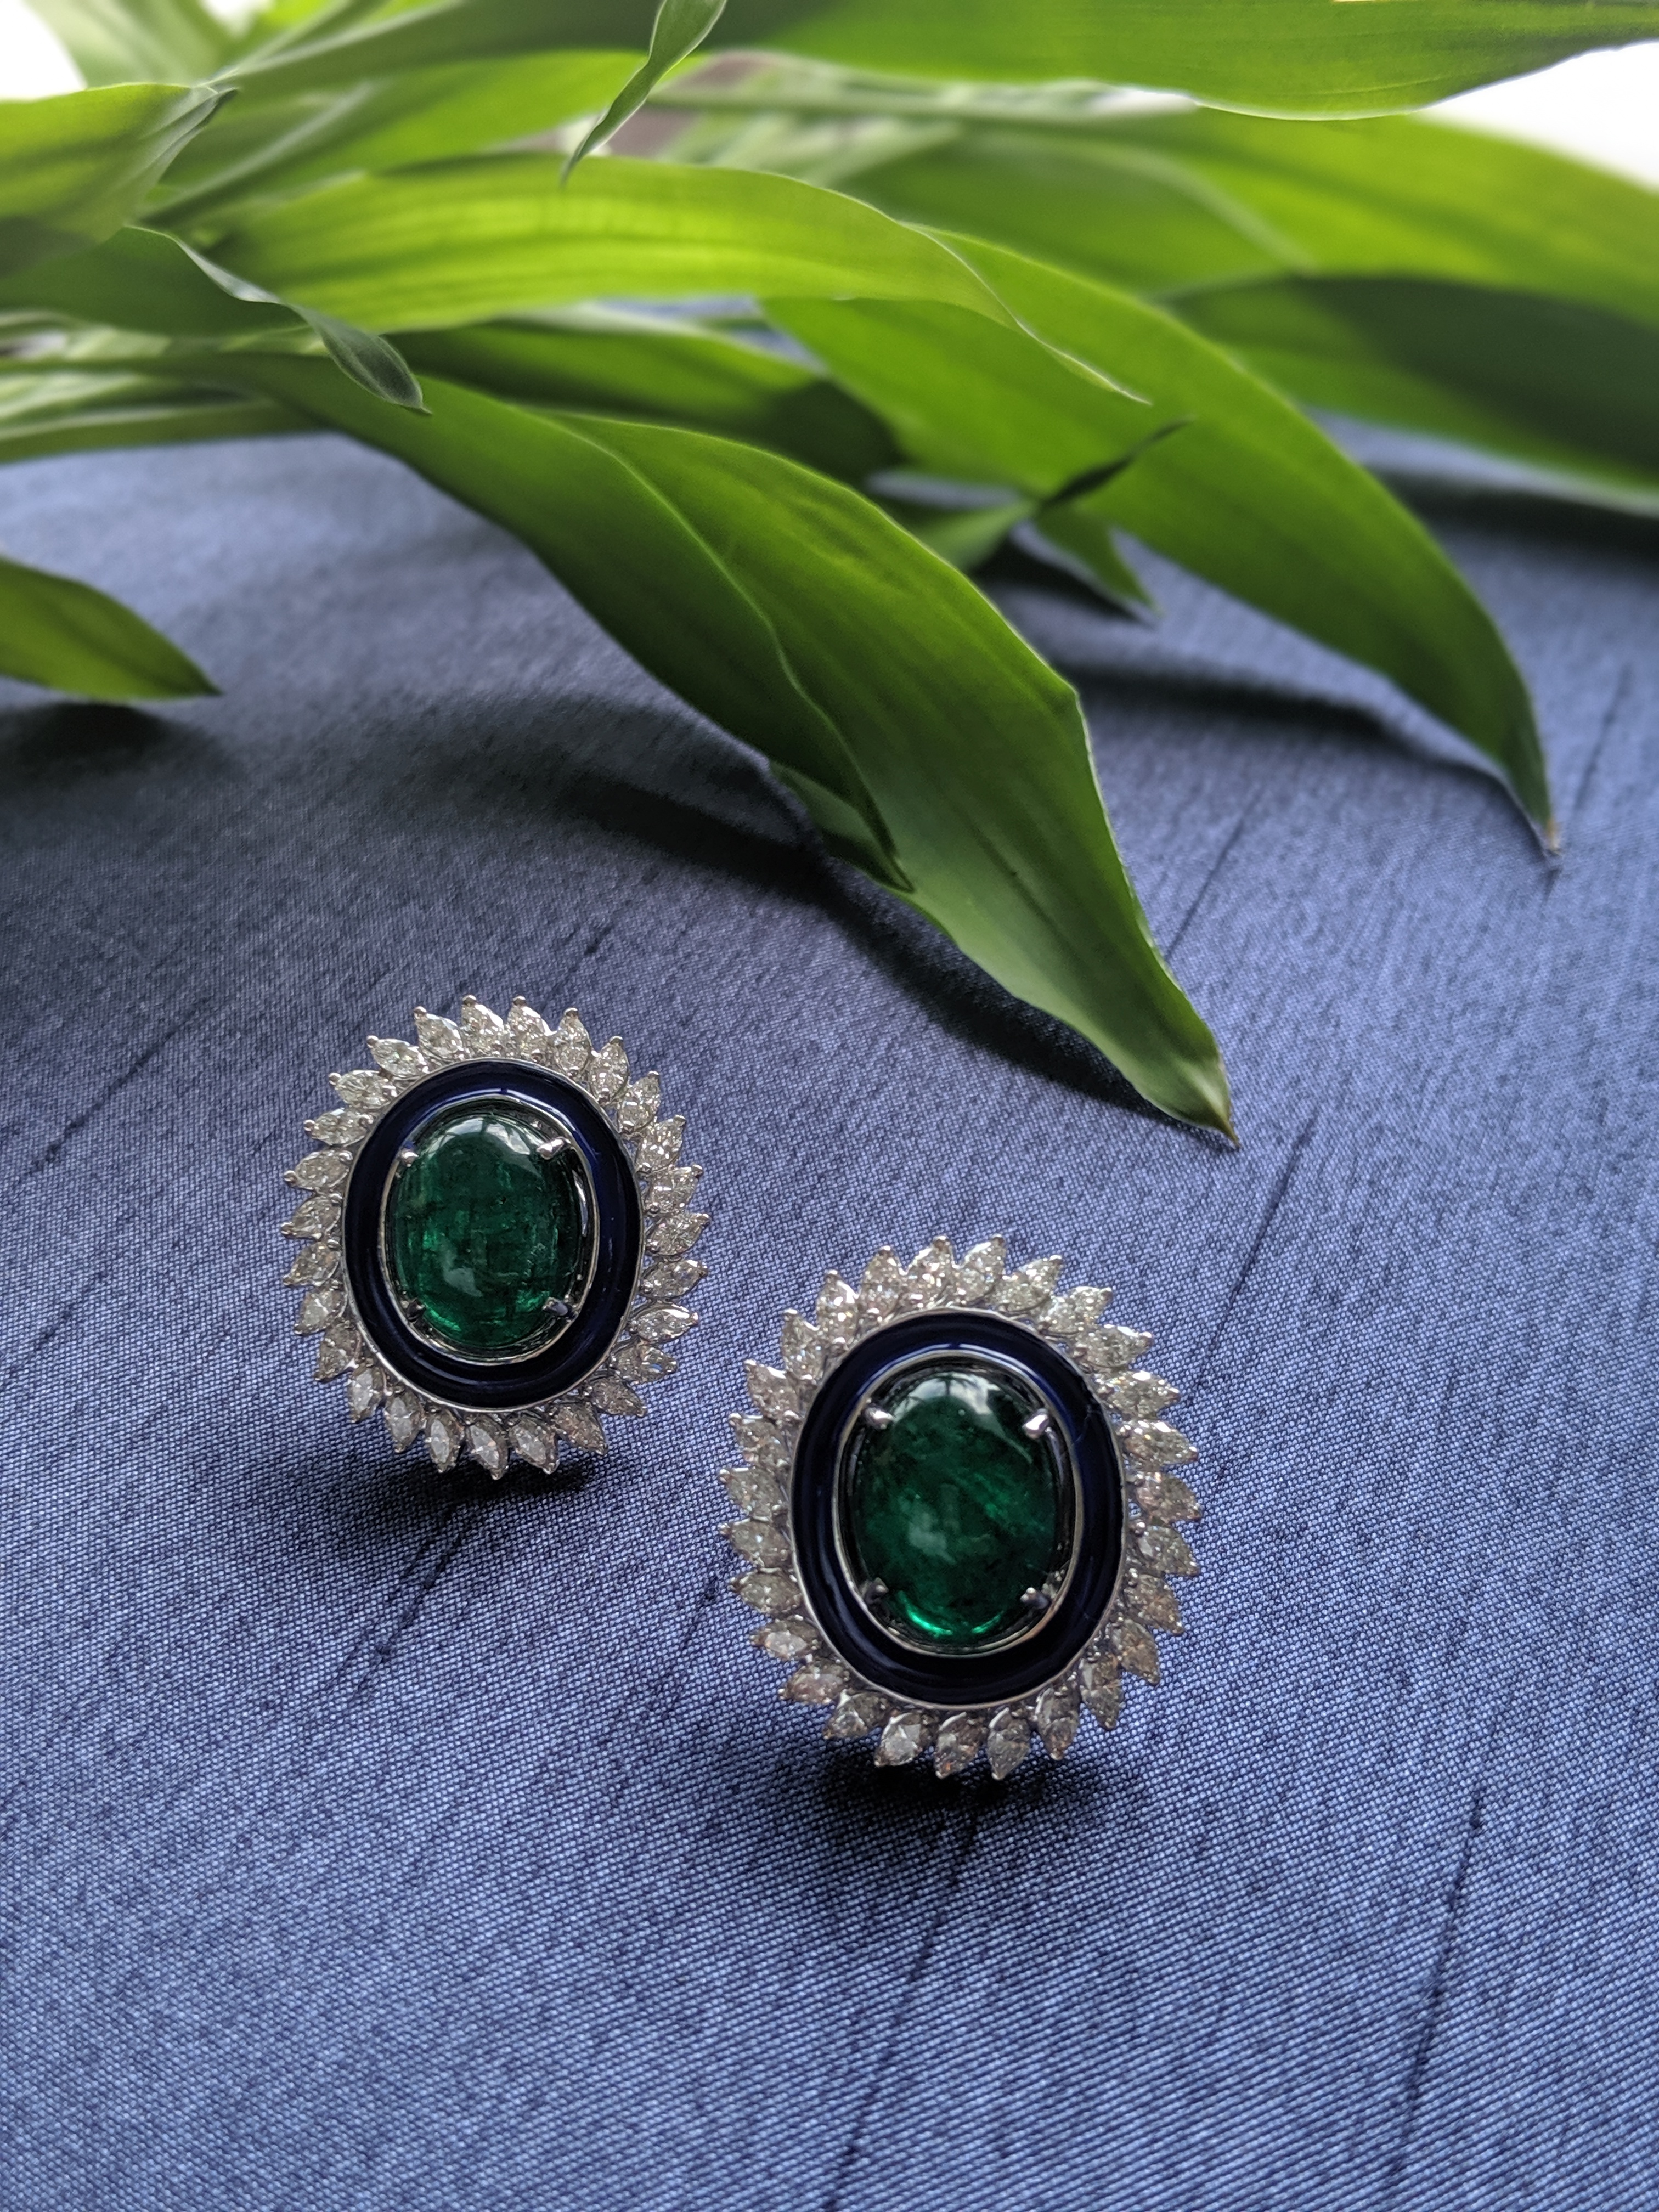 Emerald Cabochon with Diamonds and Enamel